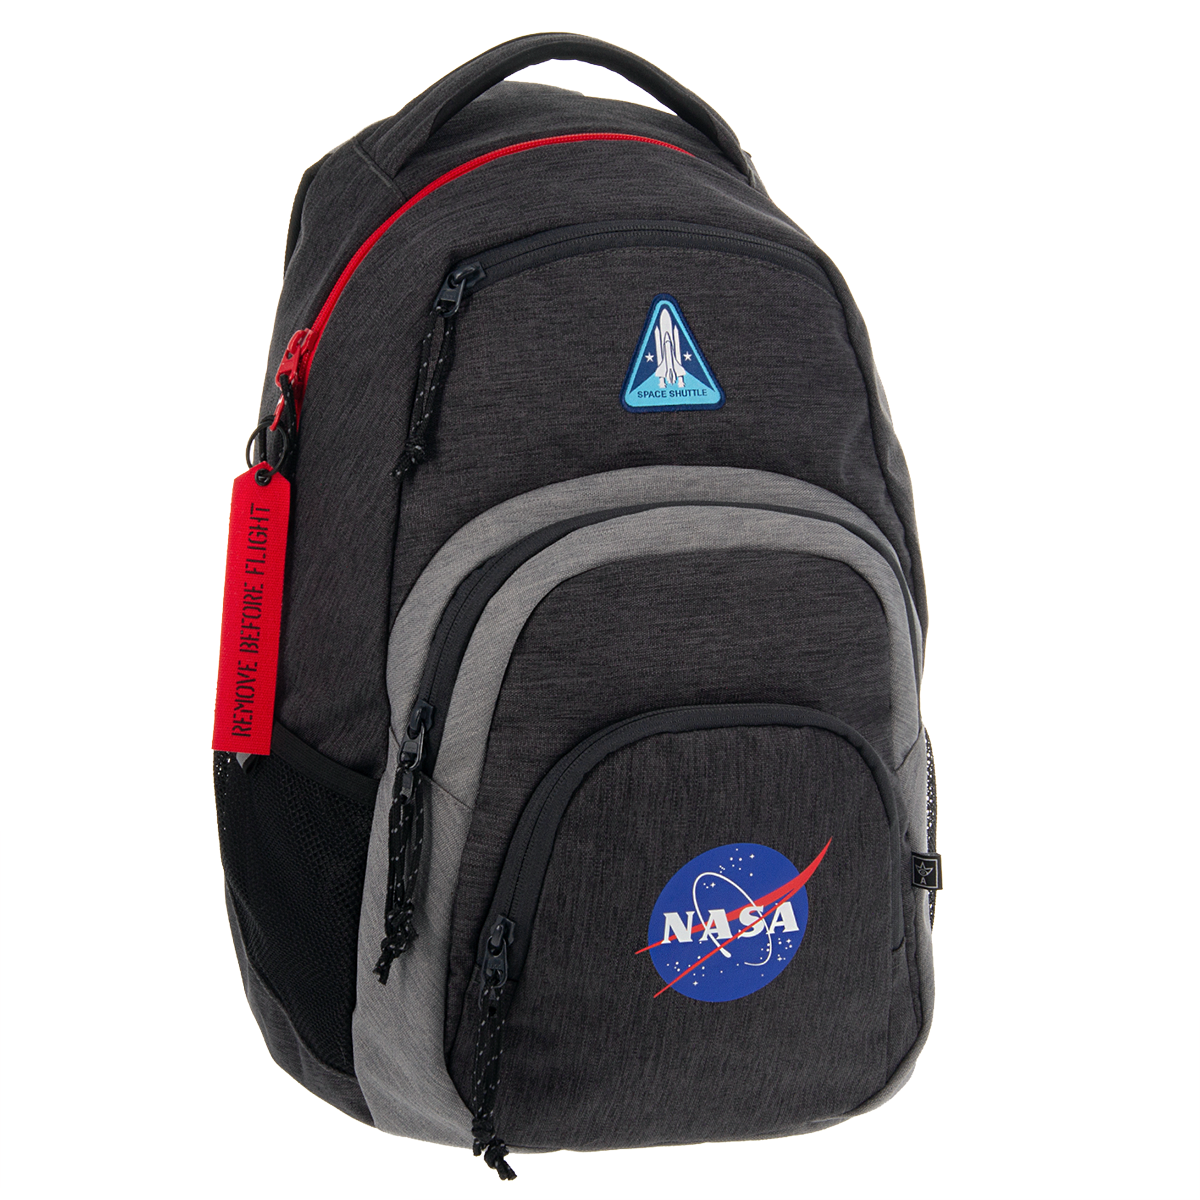 ⭐NASA Backpack Black - buy in the online store Familand